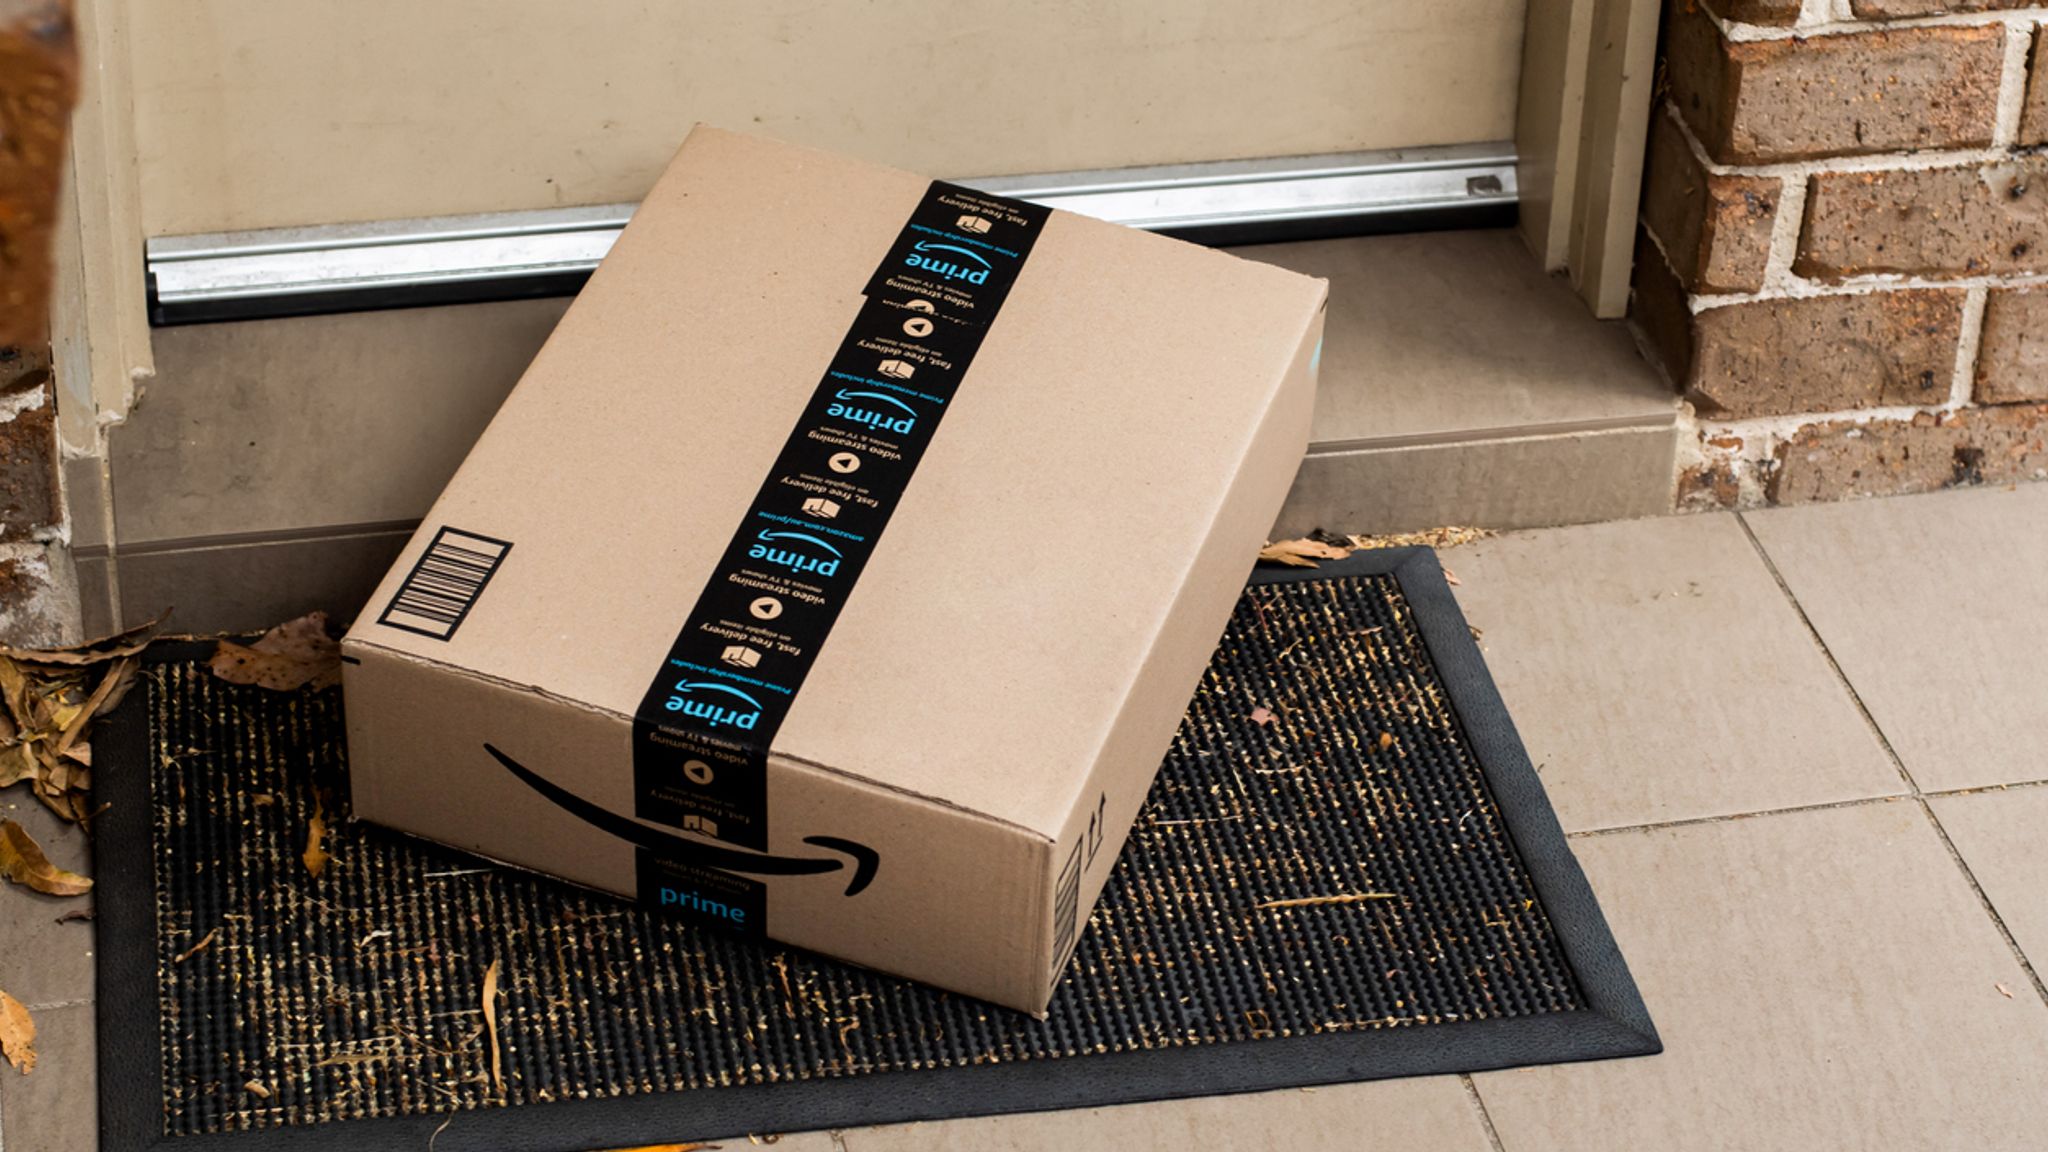 Why is  Prime One-Day Delivery not One-Day? - ChannelX